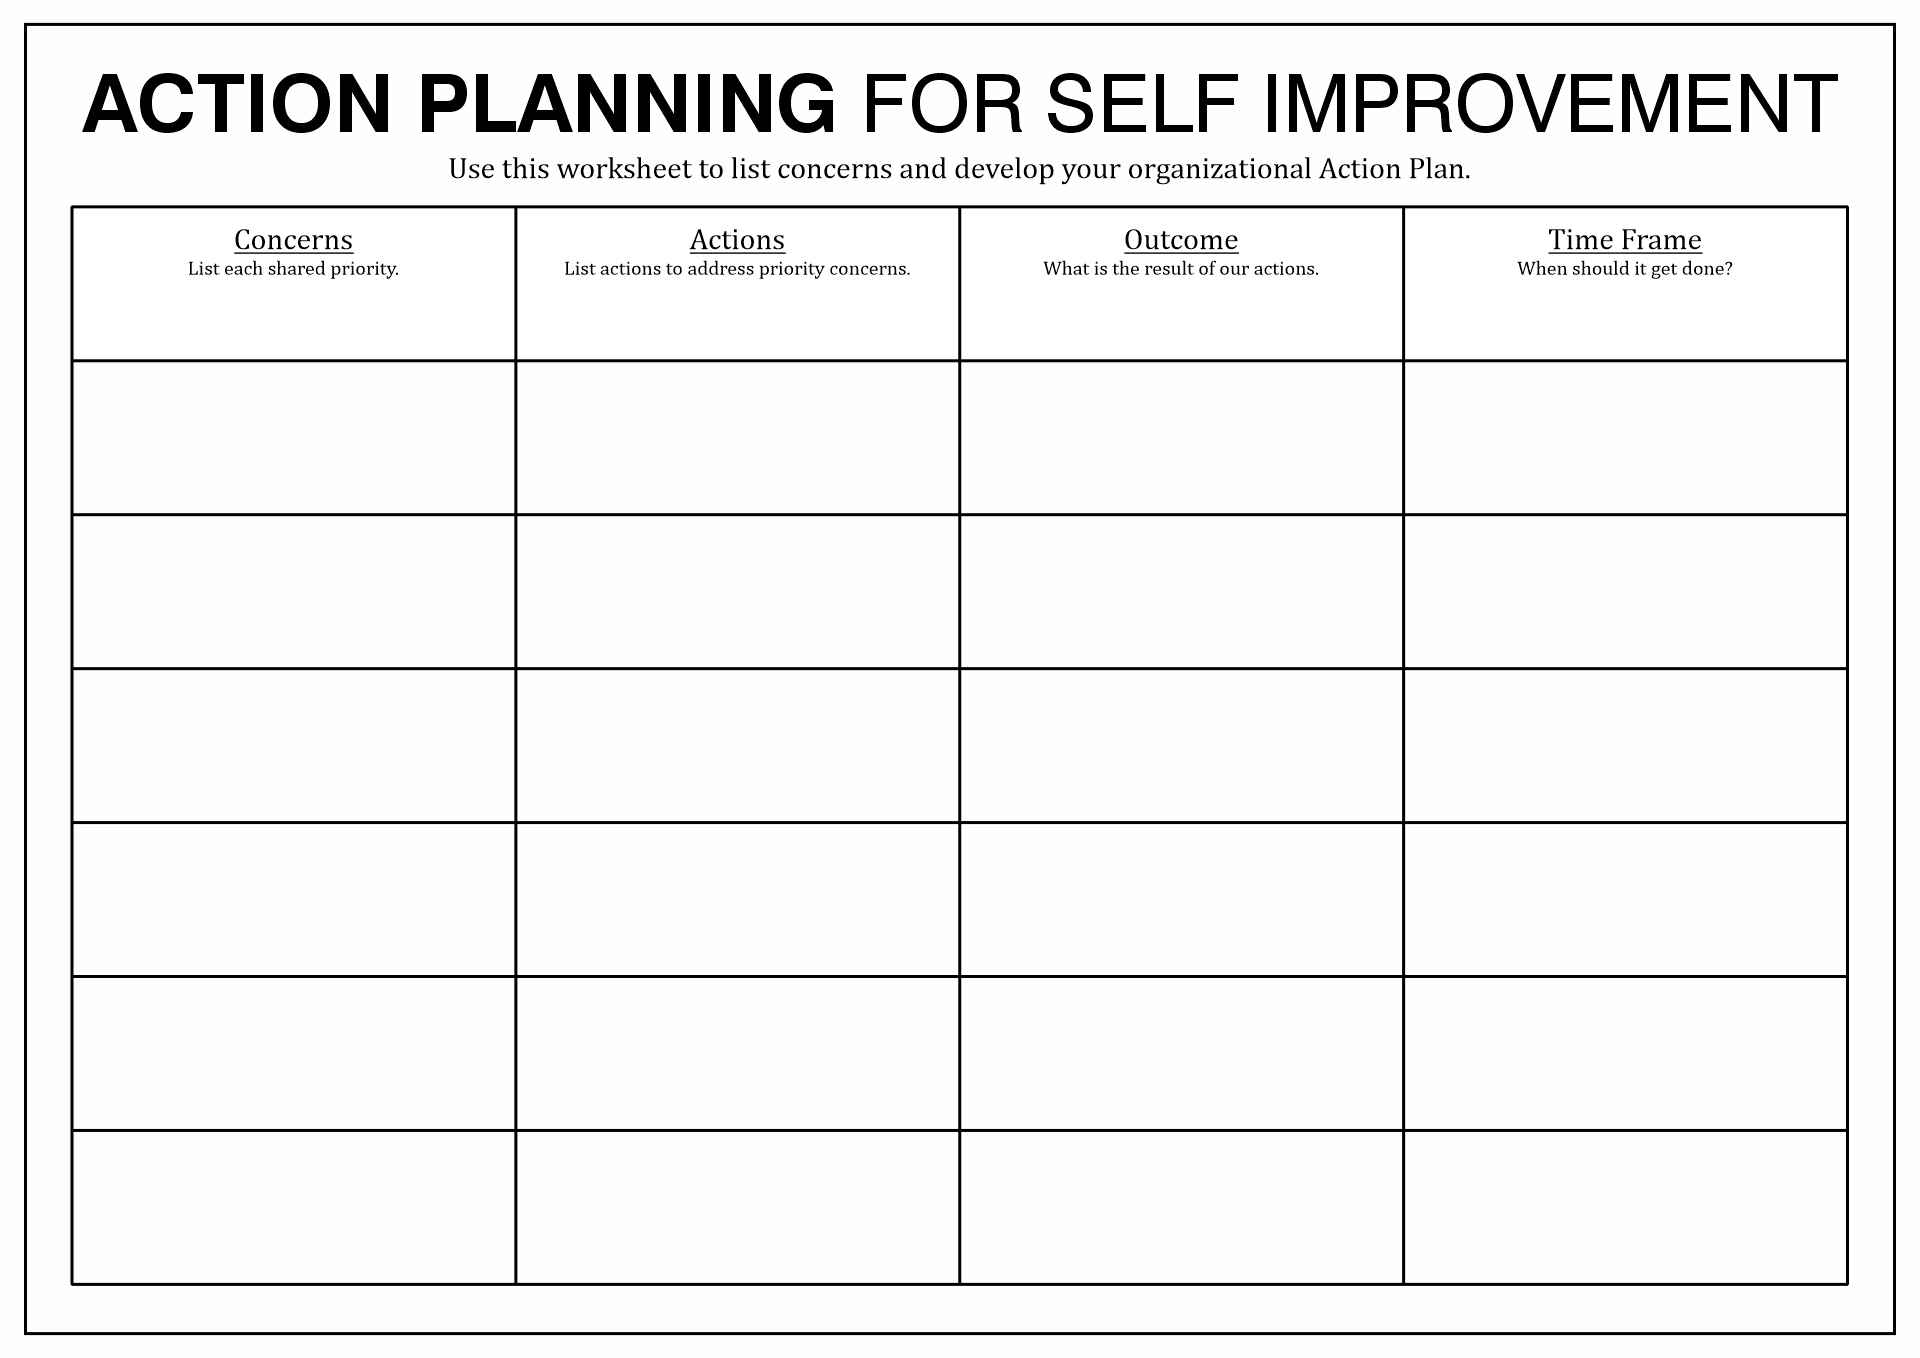 15 Best Images of Action Plan Worksheet Template Wellness Recovery